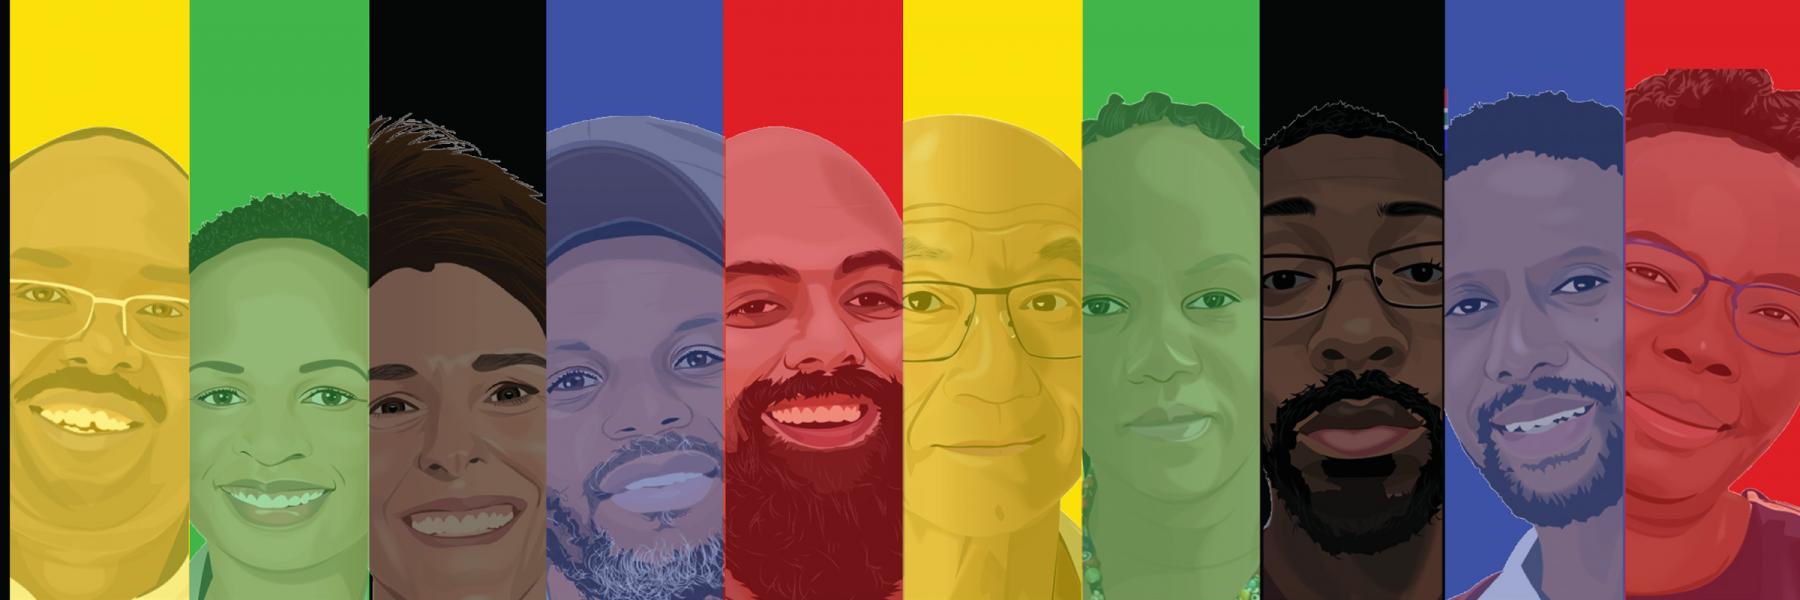 Illustration of a diverse group of international HIV activists